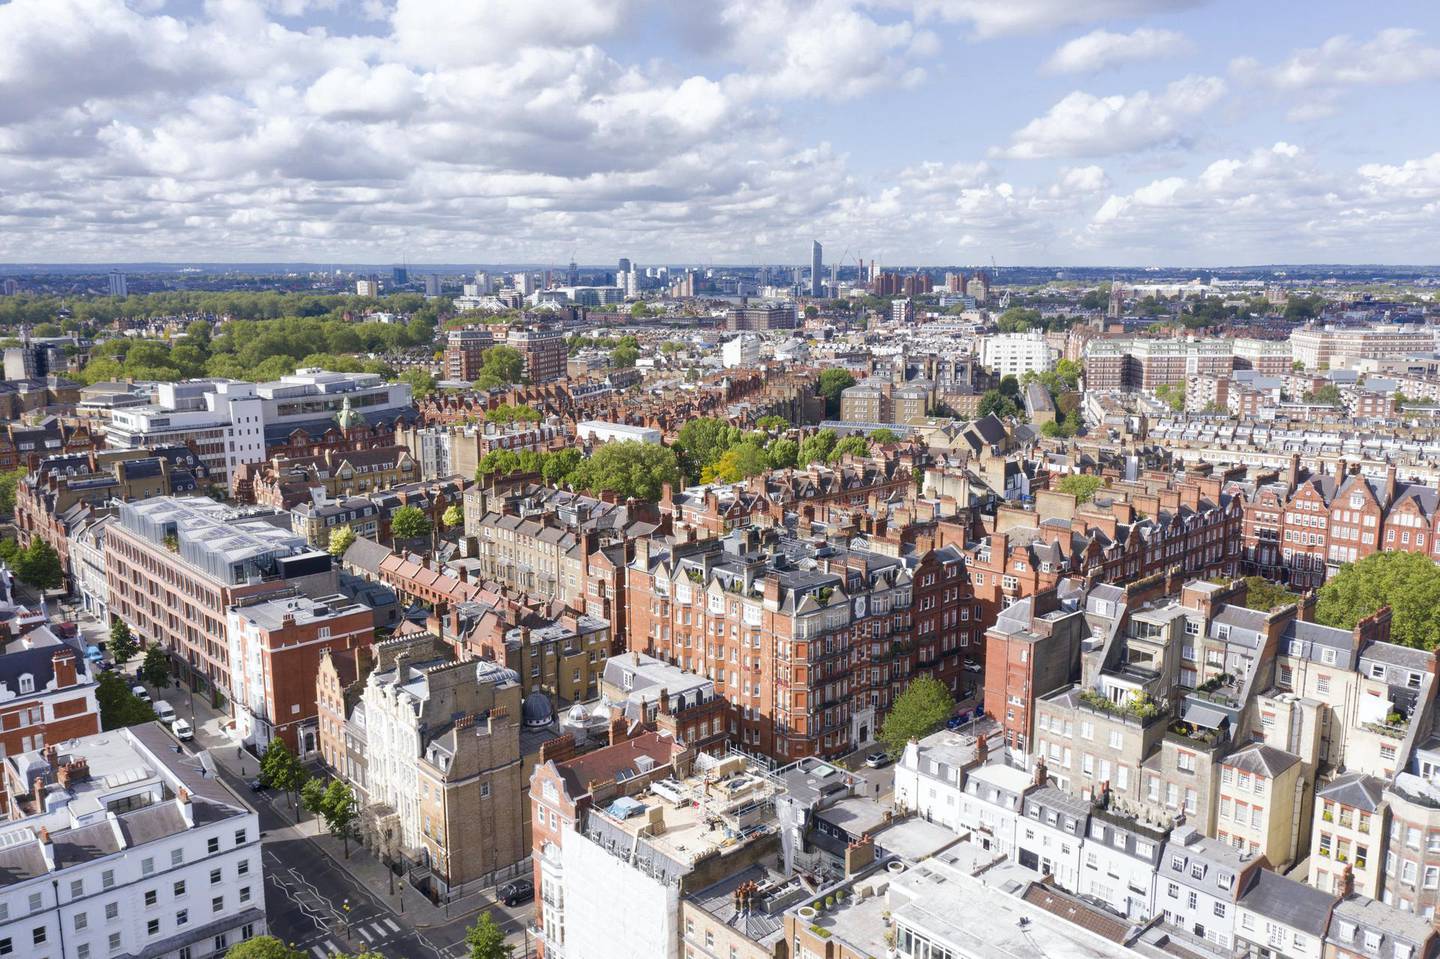 LONDON,ENGLAND - MAY 14: (EDITORS NOTE: Full Flight Permissions) An aerial view by drone looking at Chelsea across the Kings Road on May 14,2020 in London,England. (Photo by Chris Gorman/Getty Images)